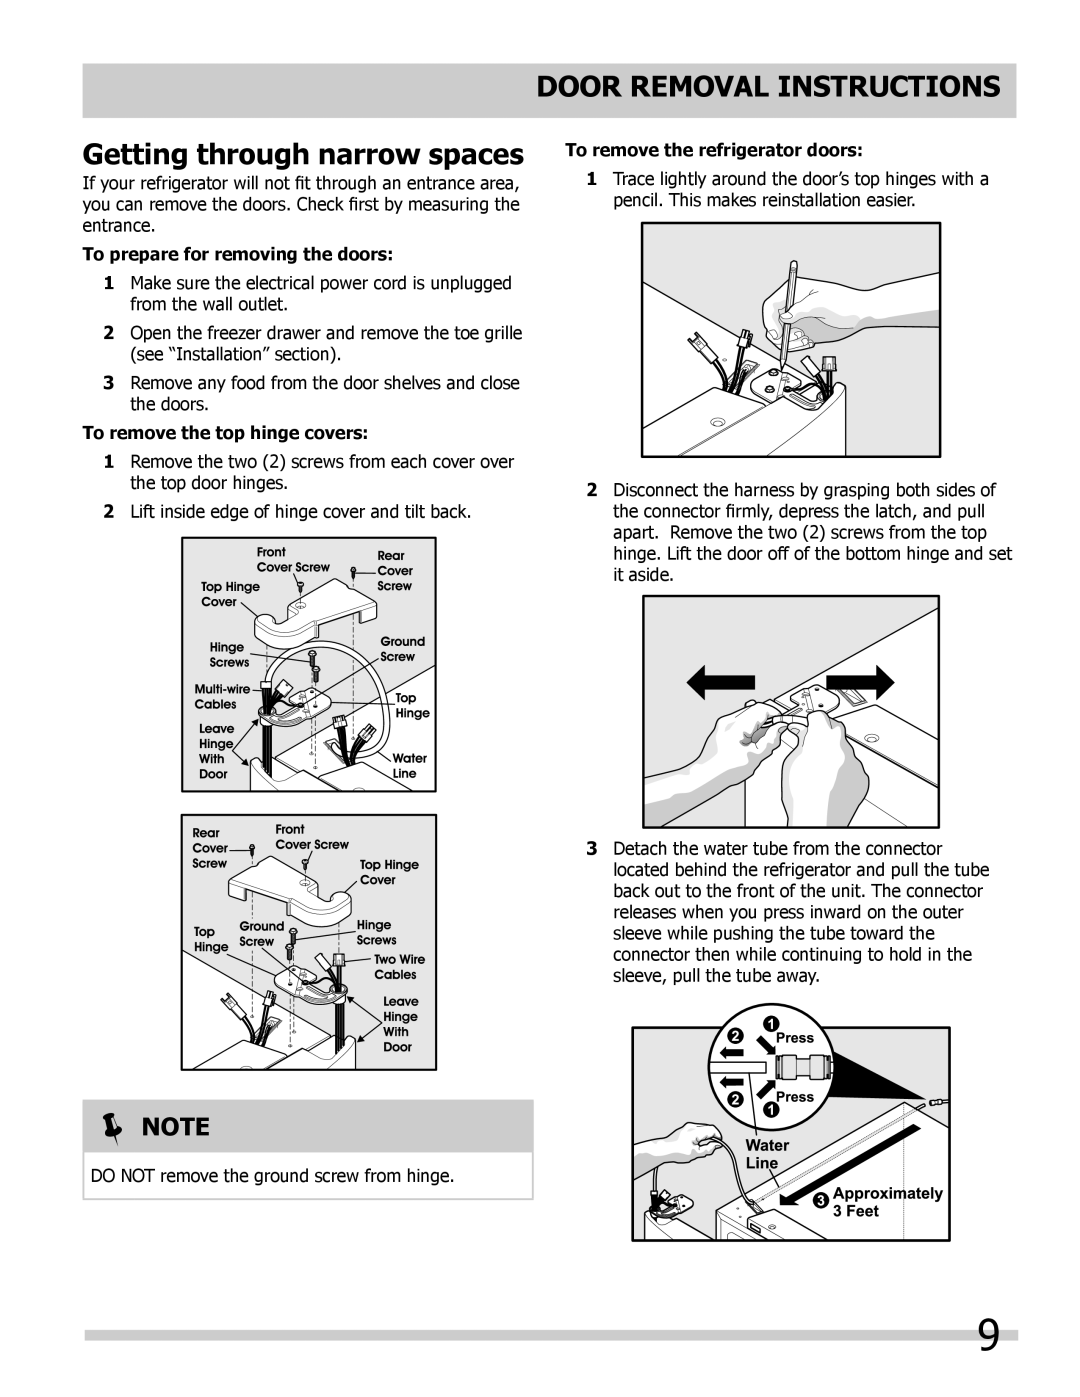 Frigidaire FGHB2844LM Door Removal Instructions, Getting through narrow spaces, To prepare for removing the doors,  Note 